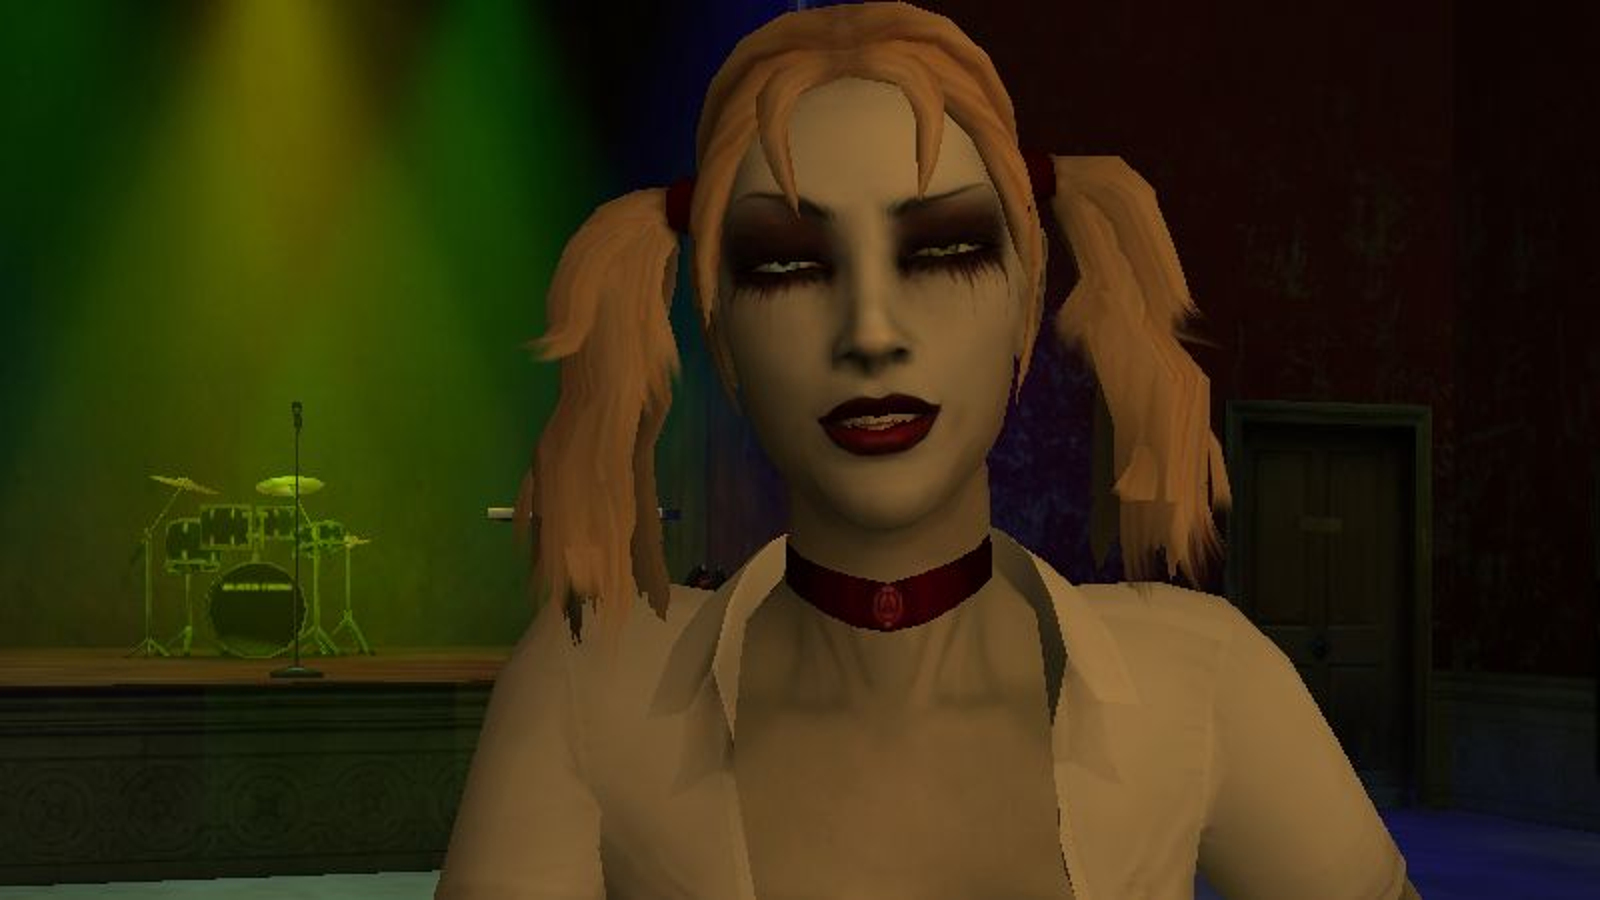 The Legacy of Vampire: The Masquerade - Bloodlines